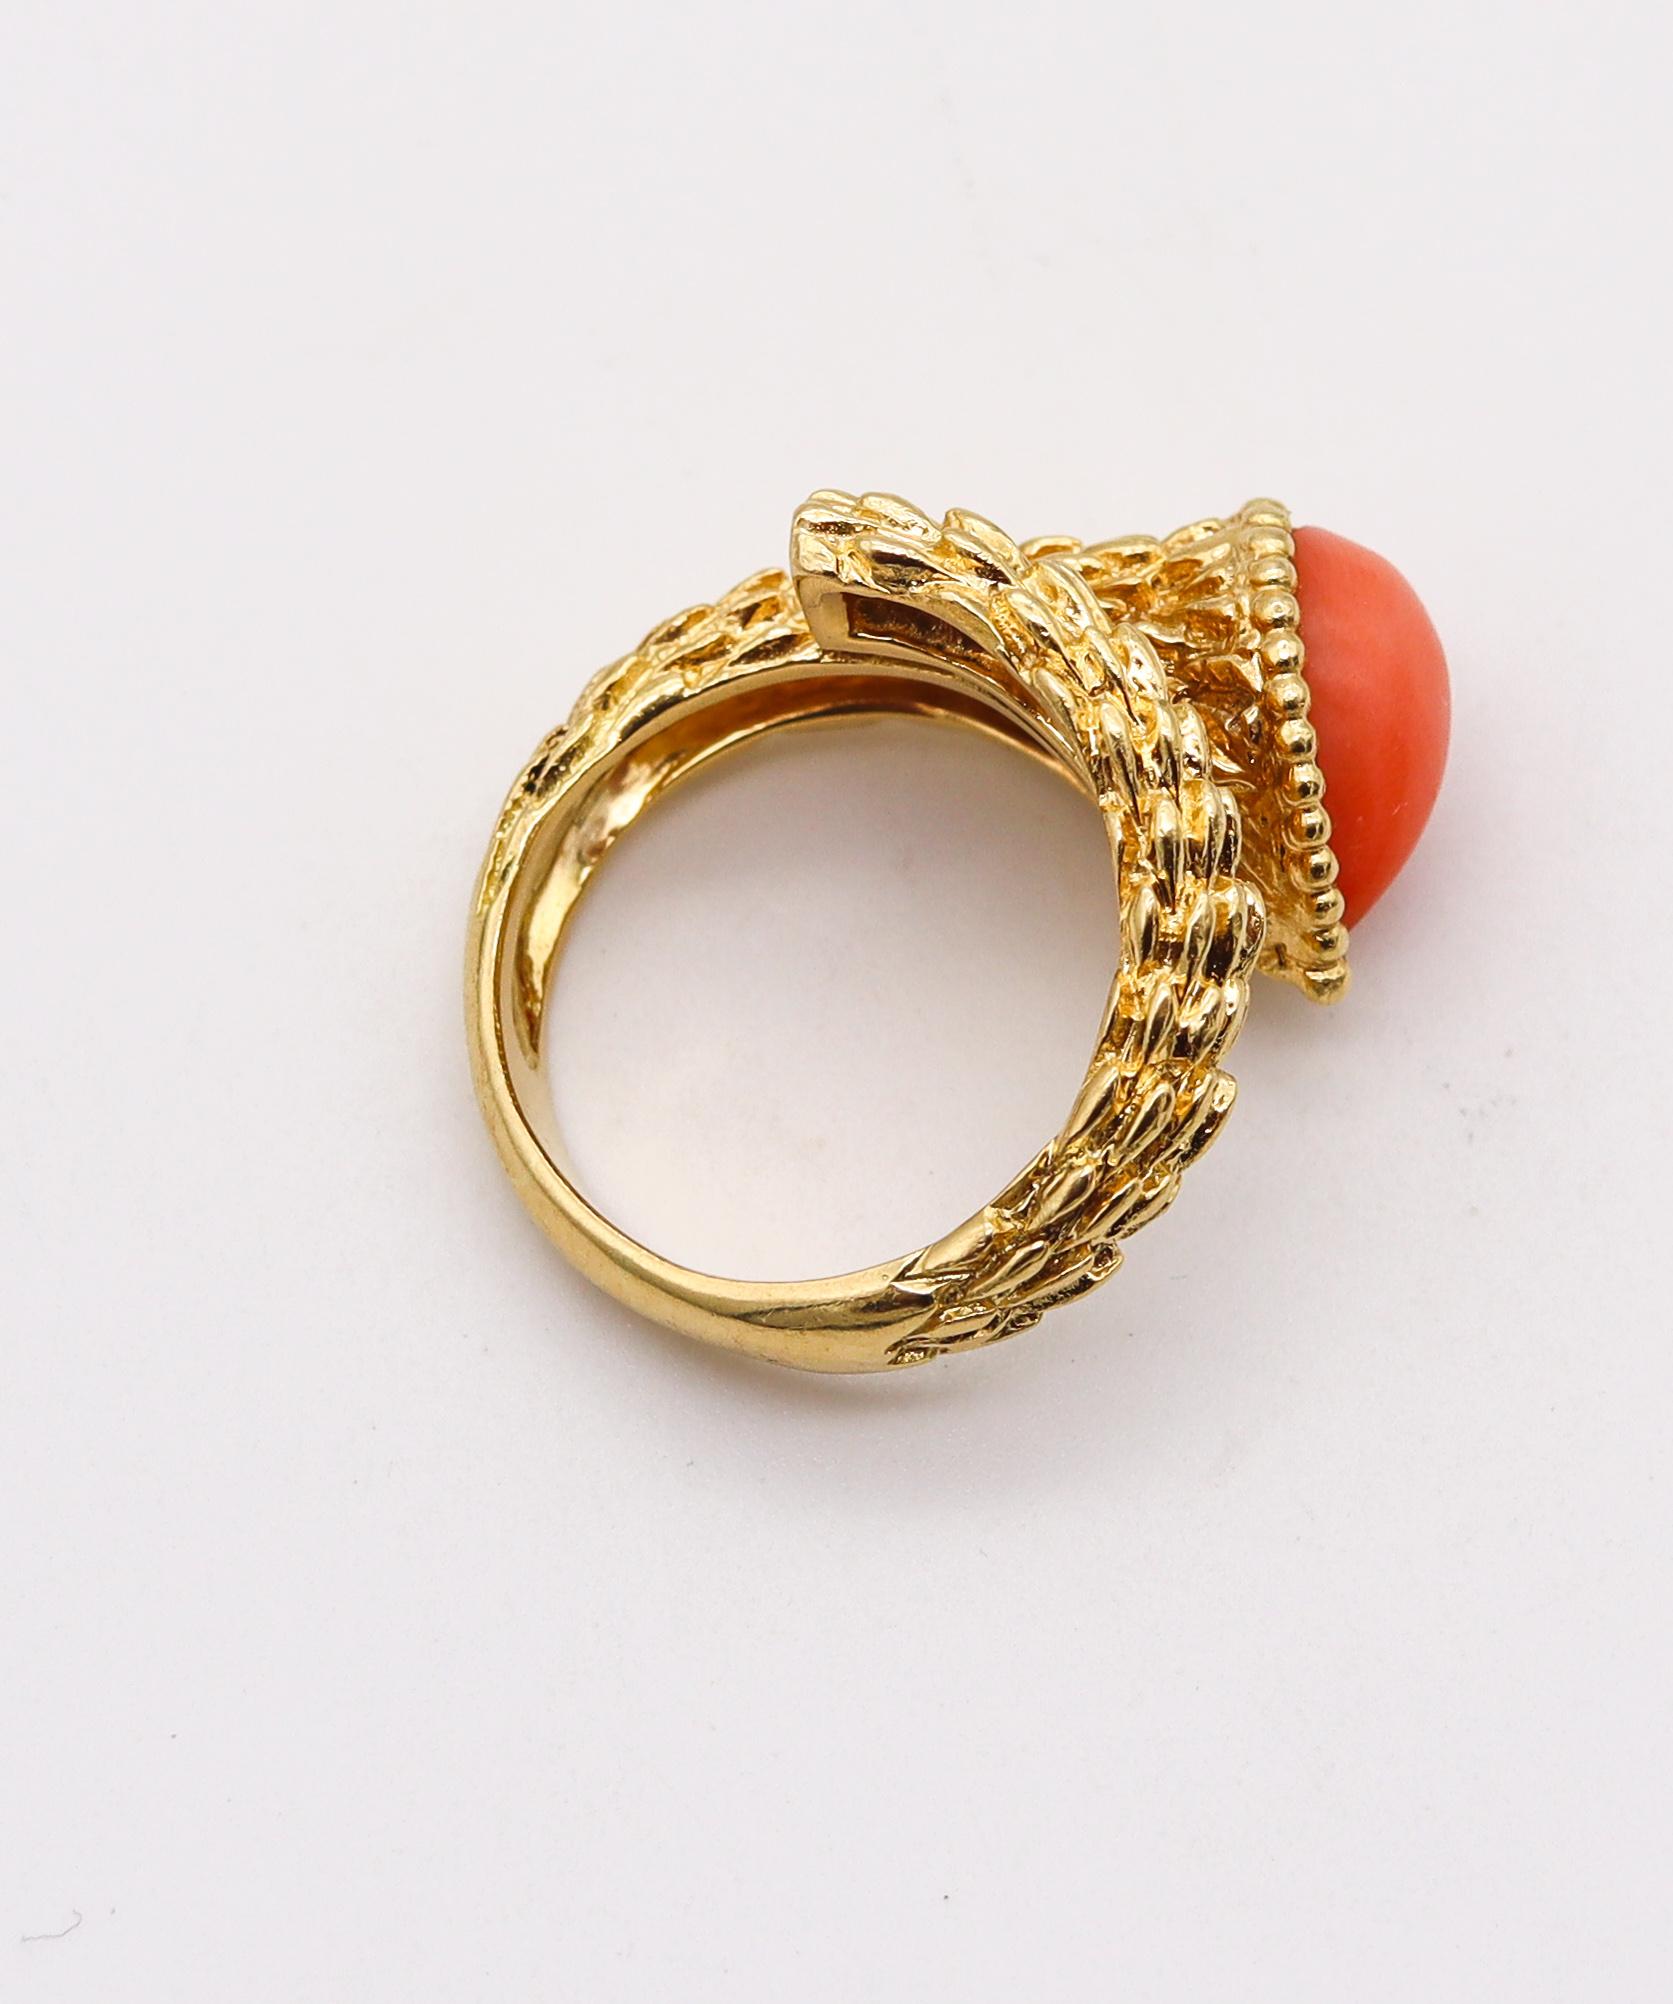 Cabochon Boucheron Paris 1970 Serpent Boheme Textured Ring In 18Kt Yellow Gold With Coral